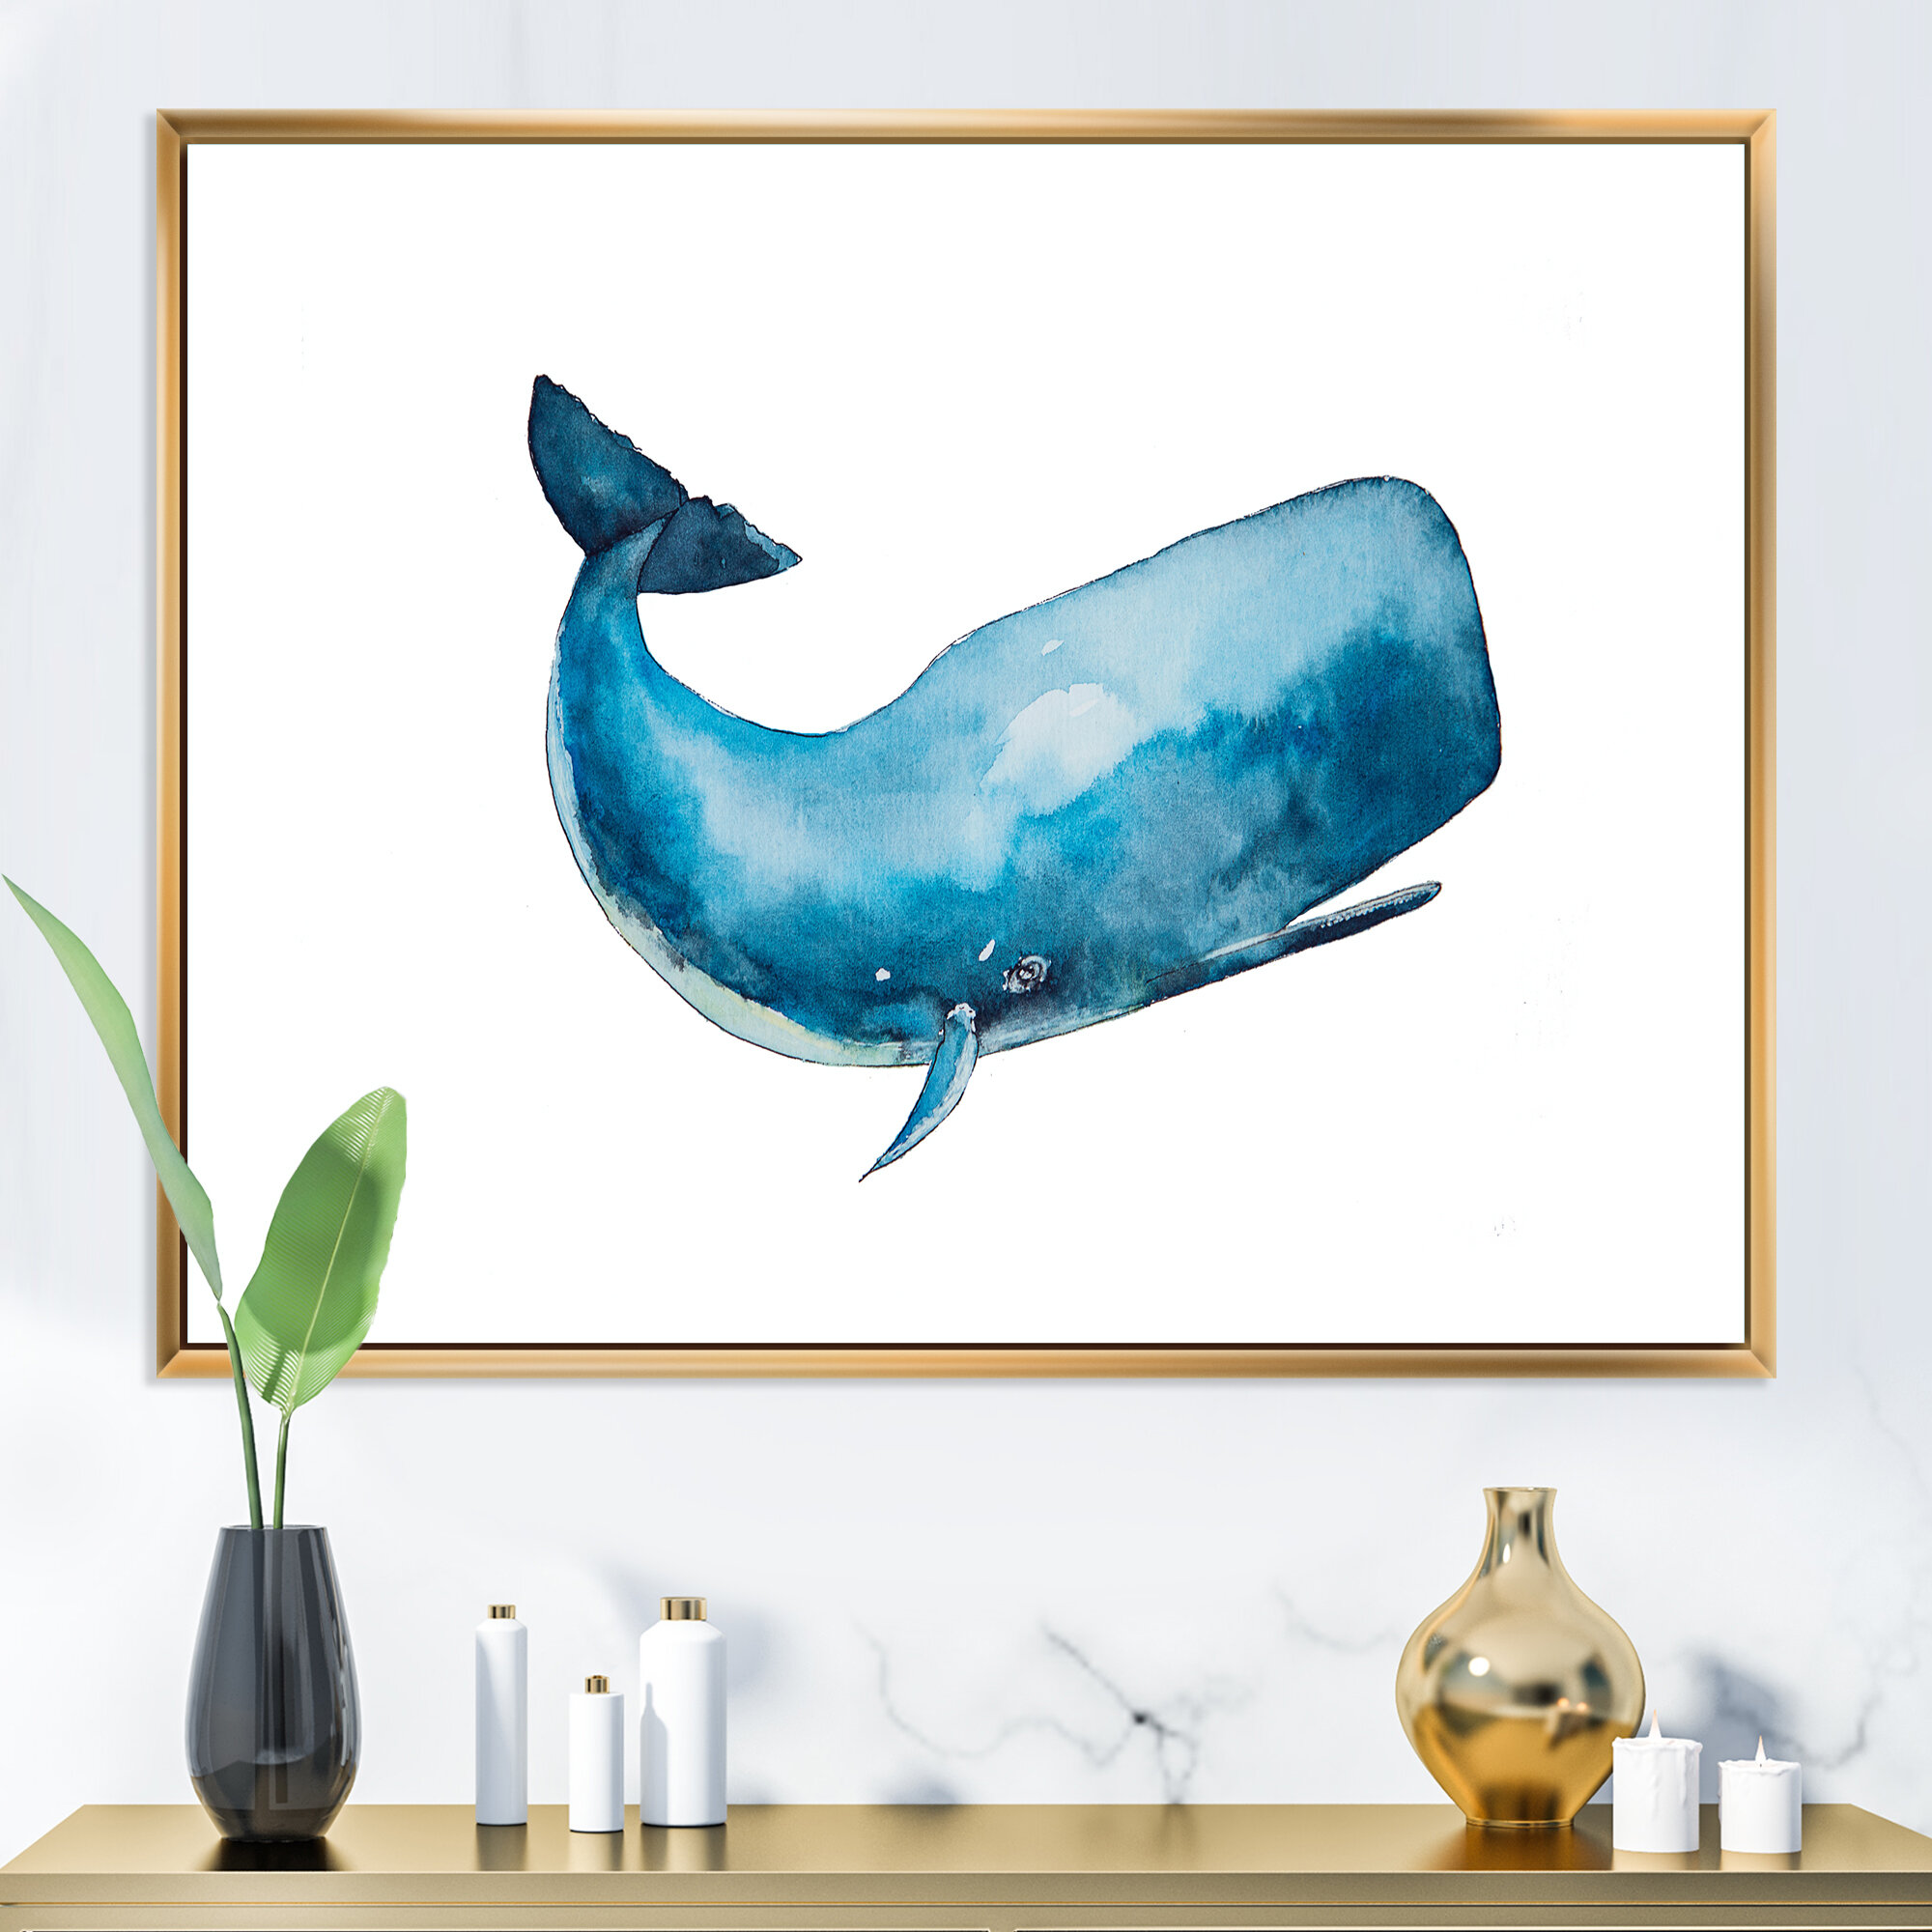 Blue Sperm Whale On White I - Painting On Canvas East Urban Home Size: 34 H x 44 W x 1.5 D, Format: Black Picture Framed